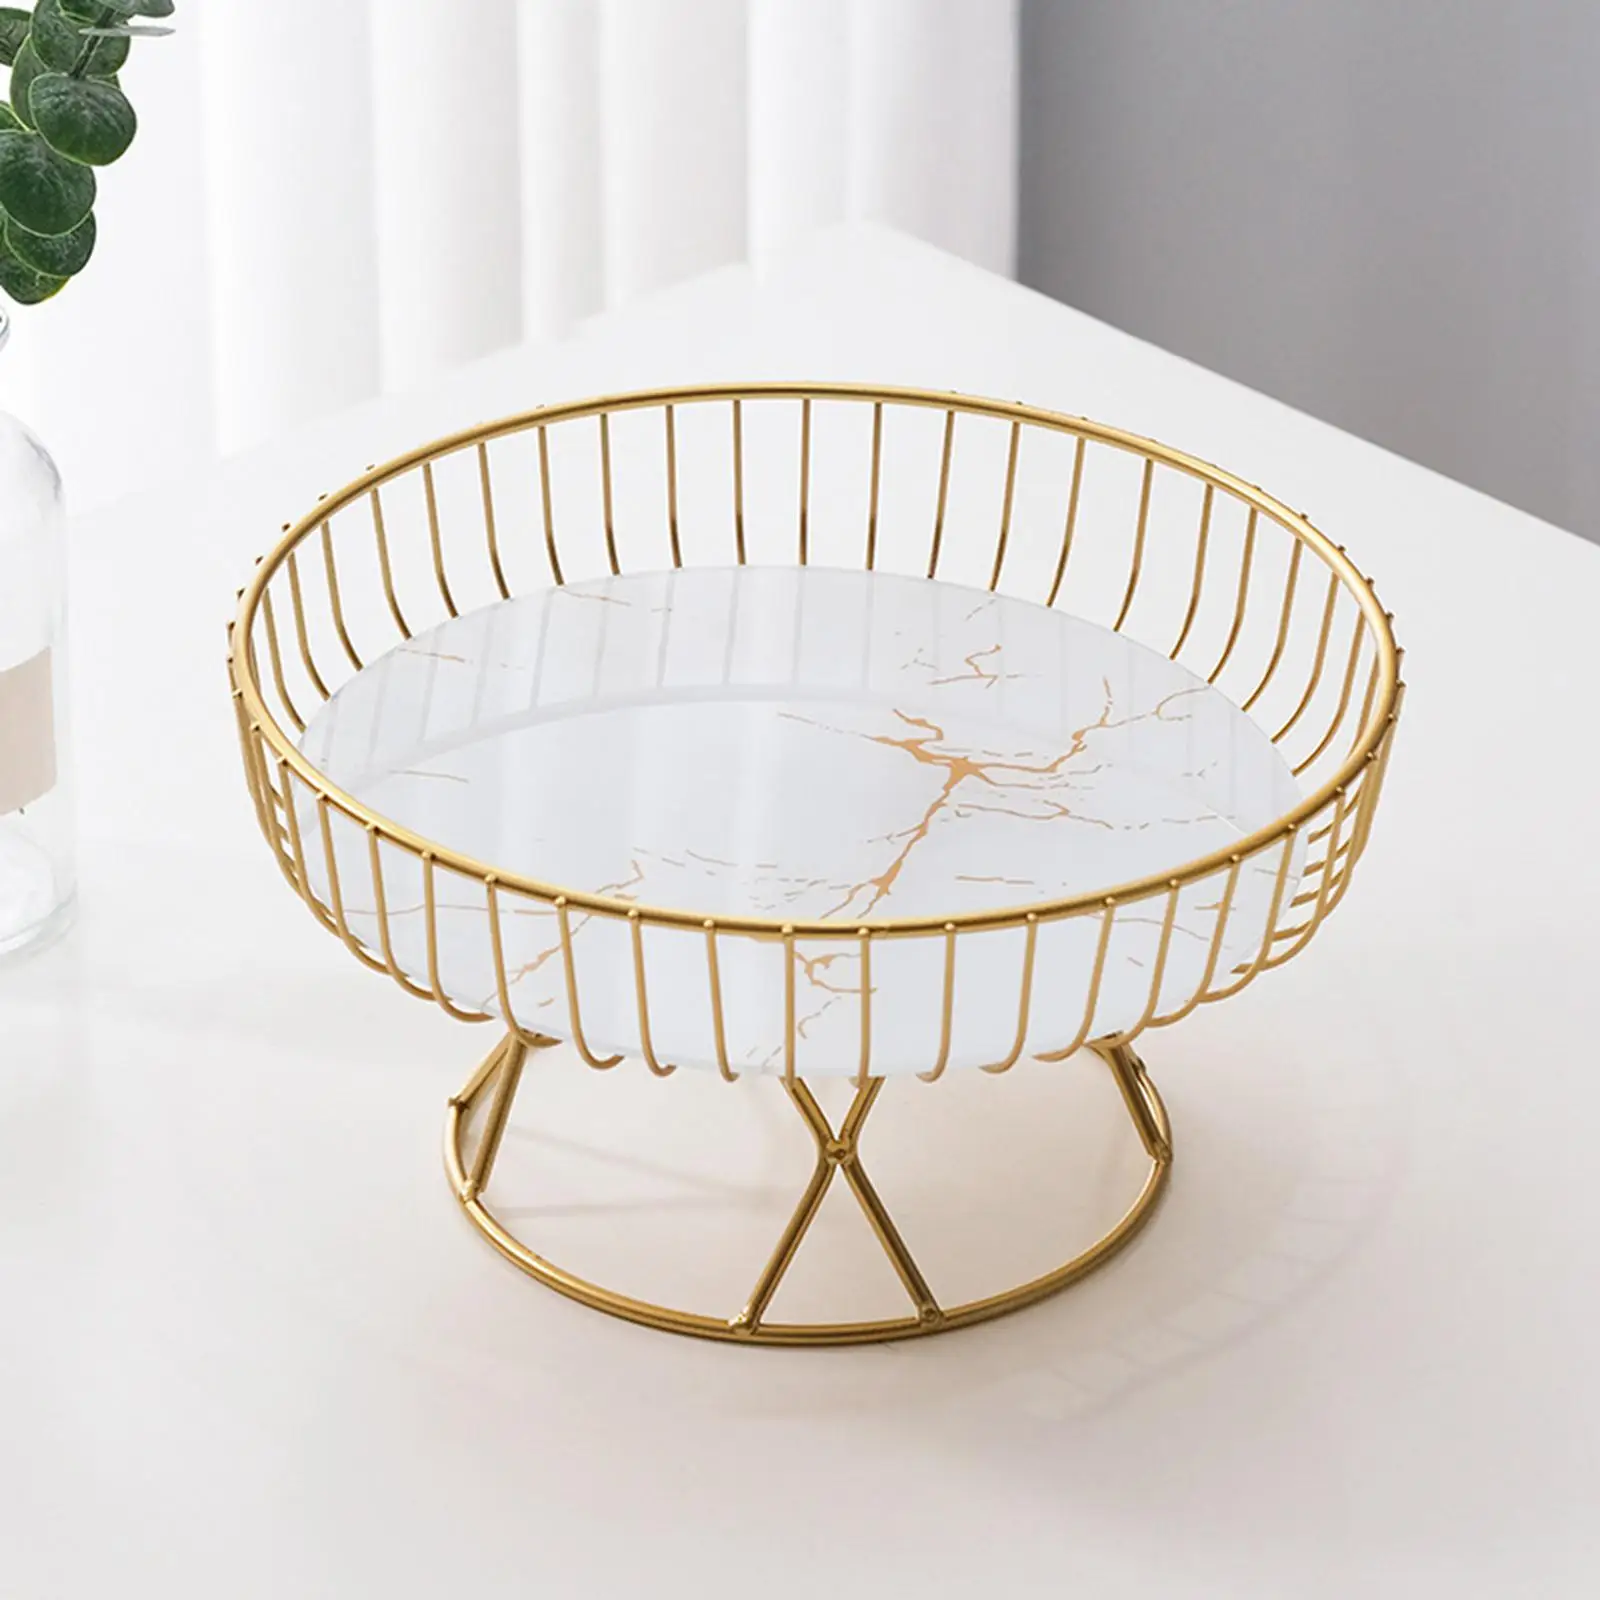 Tabletop Golden Metal Iron Wire Countertop Fruit Tray Cakes Holder, Breathable Stylish